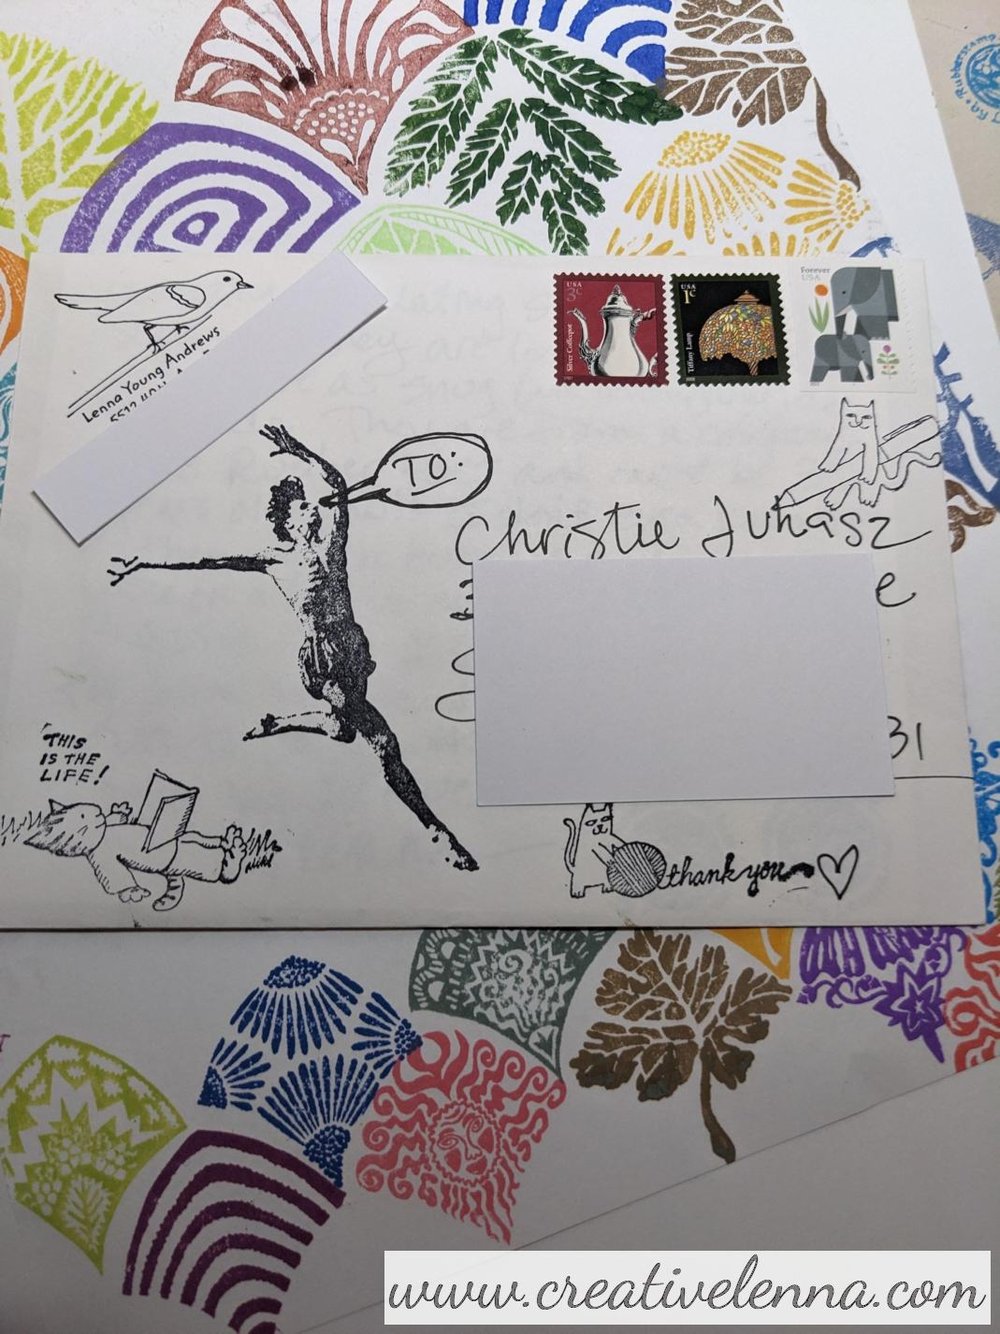 mail art for Christie!